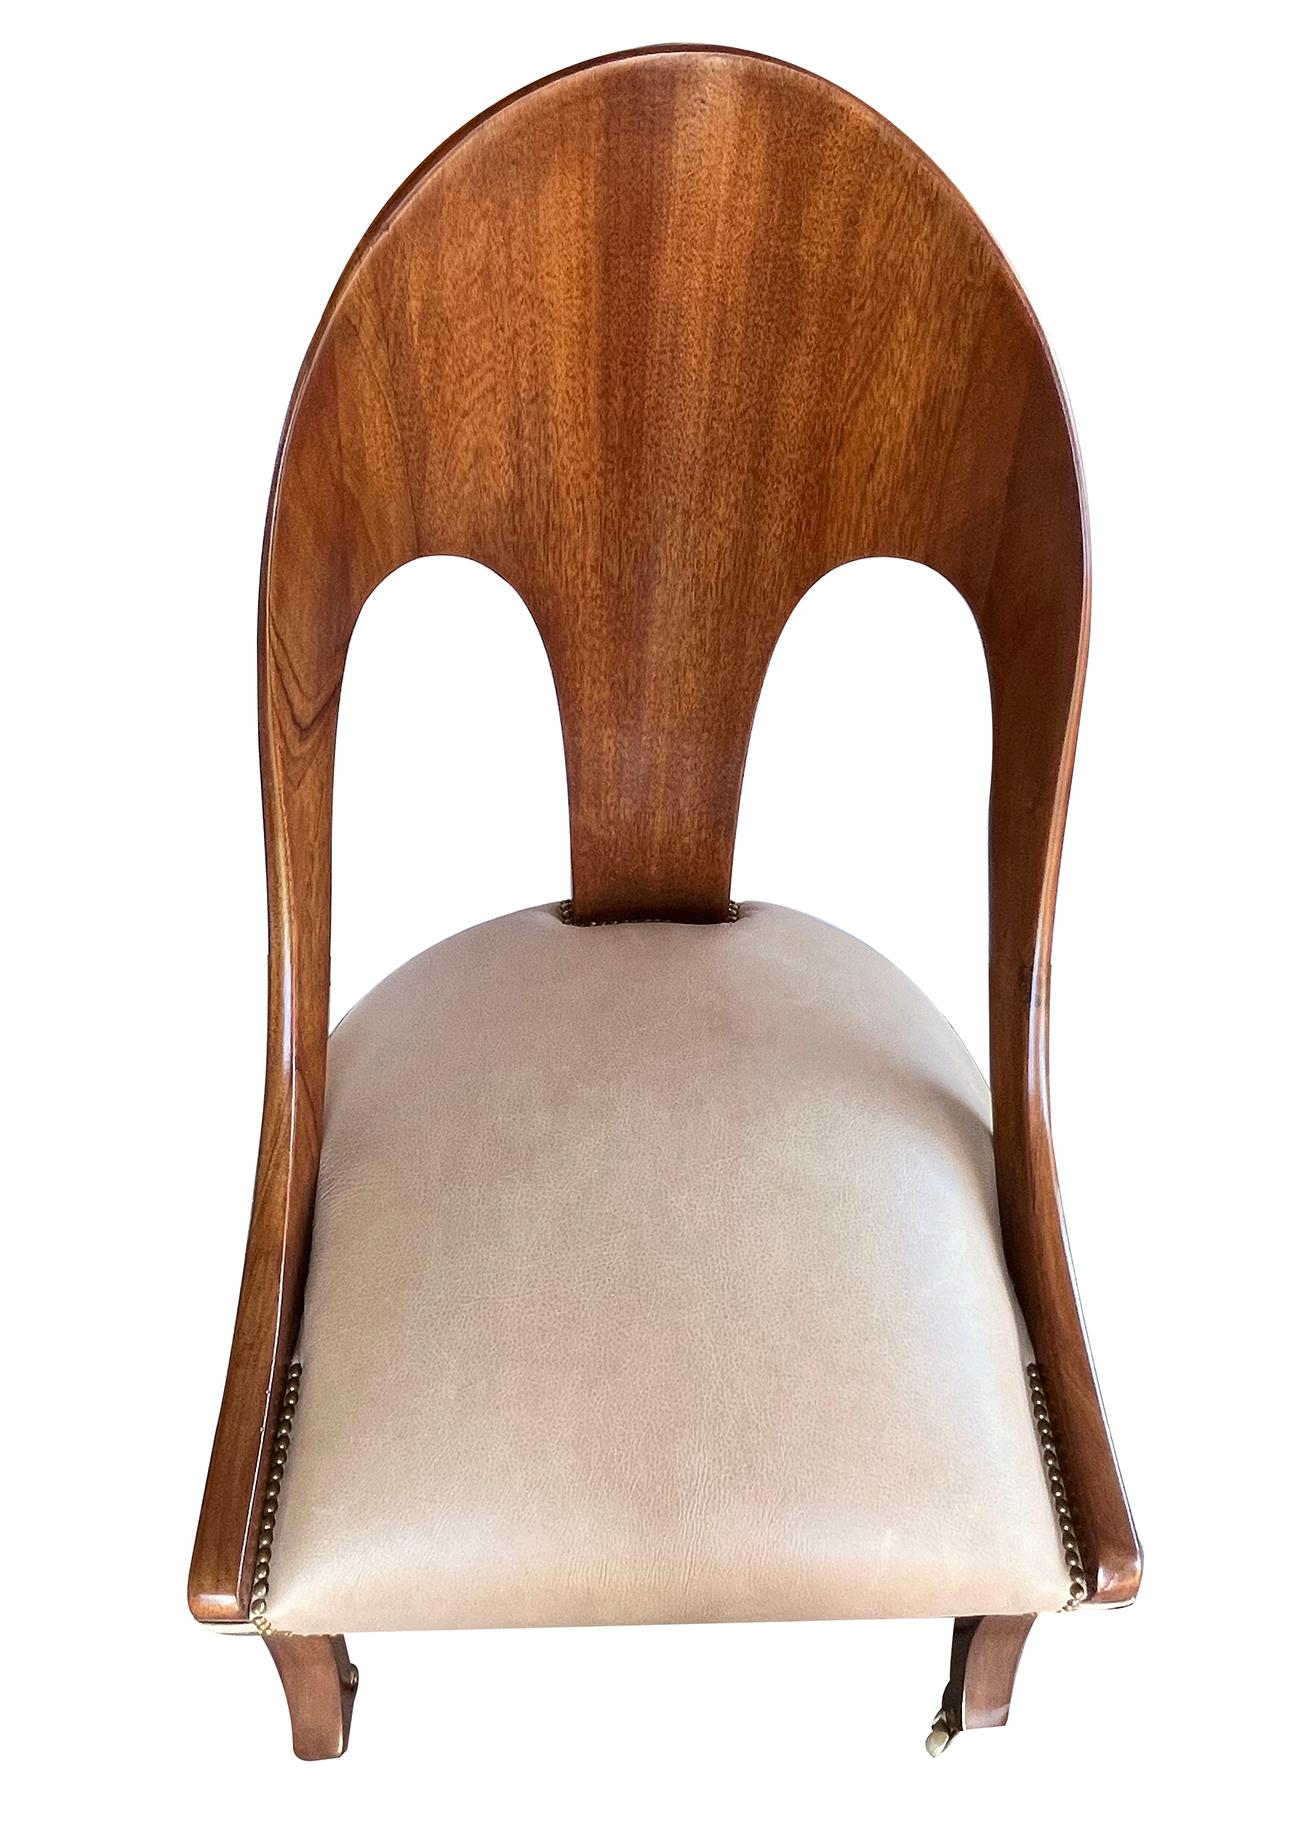 Of heavy solid mahogany construction with in-curved arching back sloping down to a tight seat all raised on splayed supports ending in brass casters.